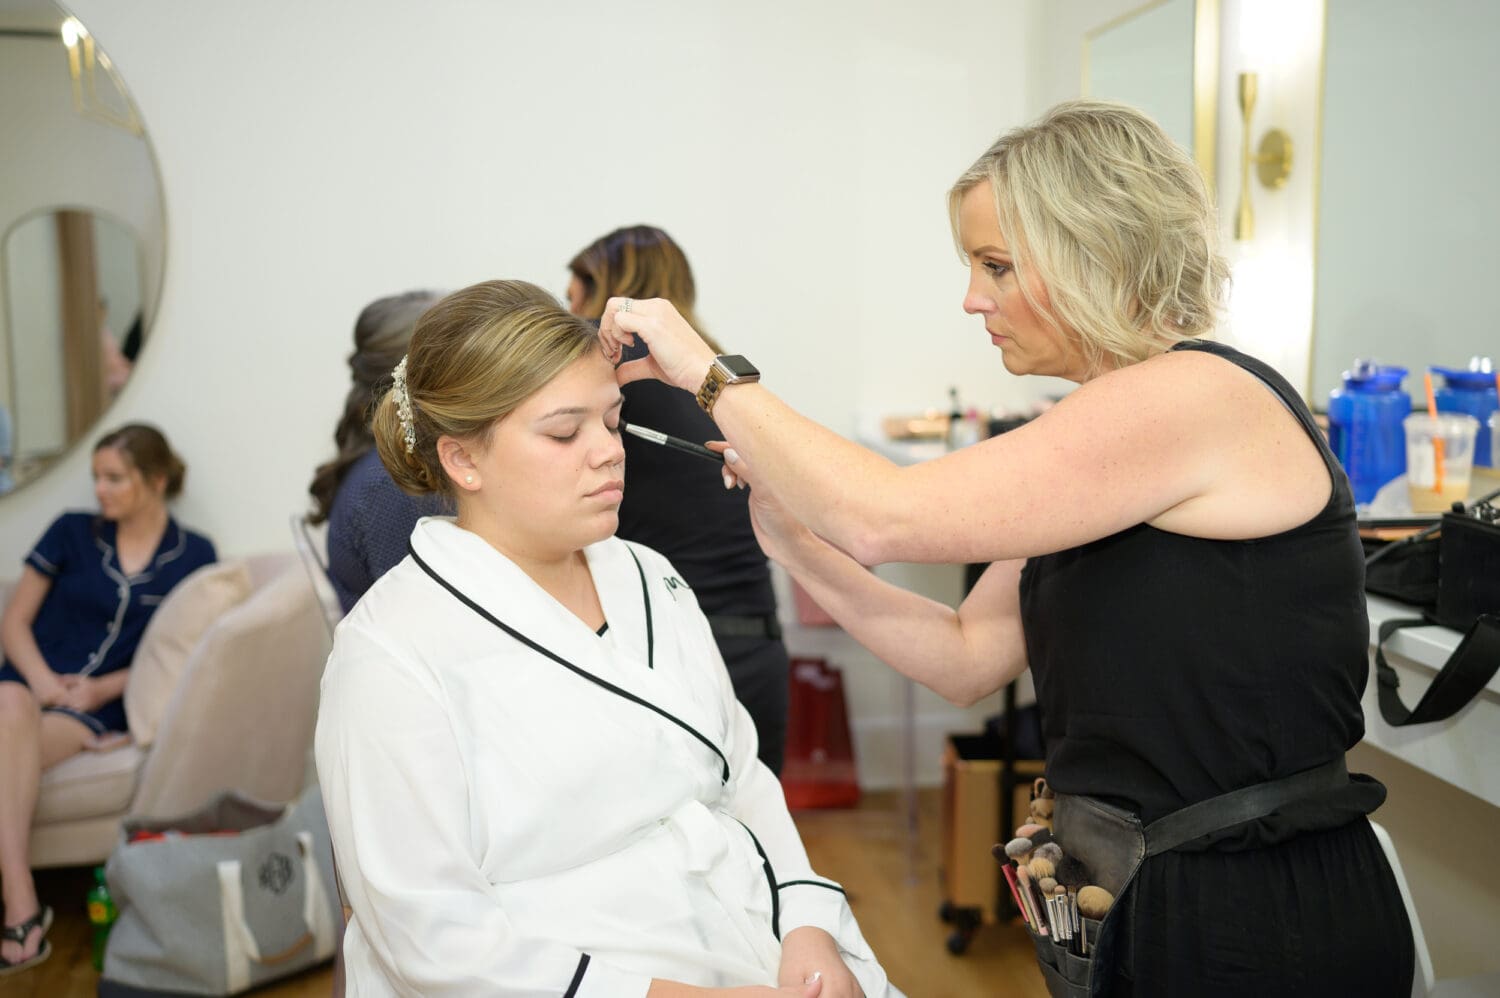 Bride getting makeup from The Blushing Bride - The Venue at White Oaks Farm